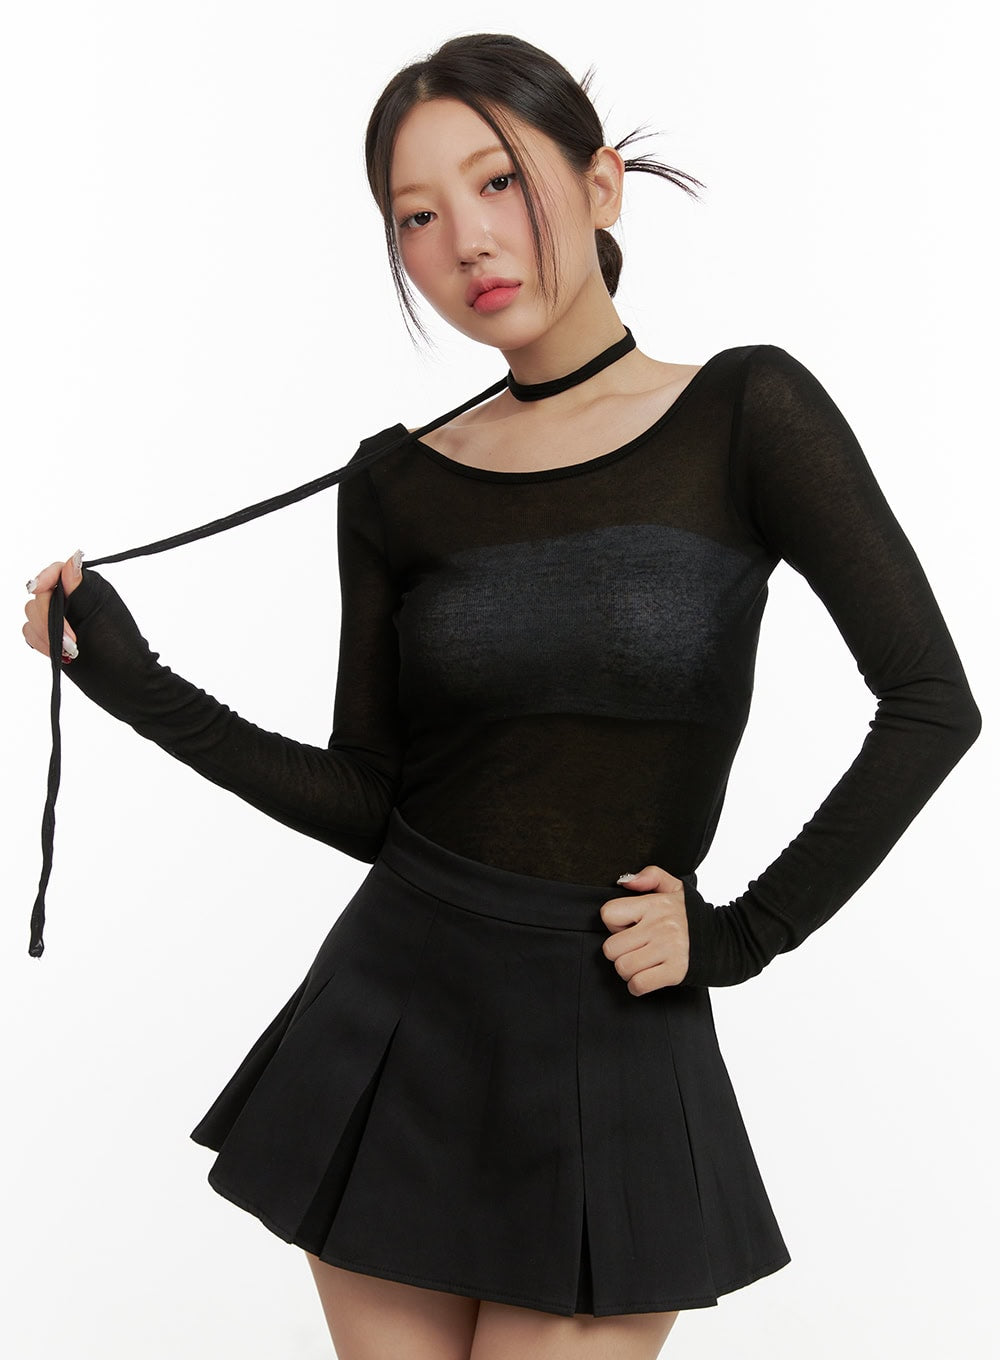 sheer-u-neck-top-with-scarf-ou403 / Black